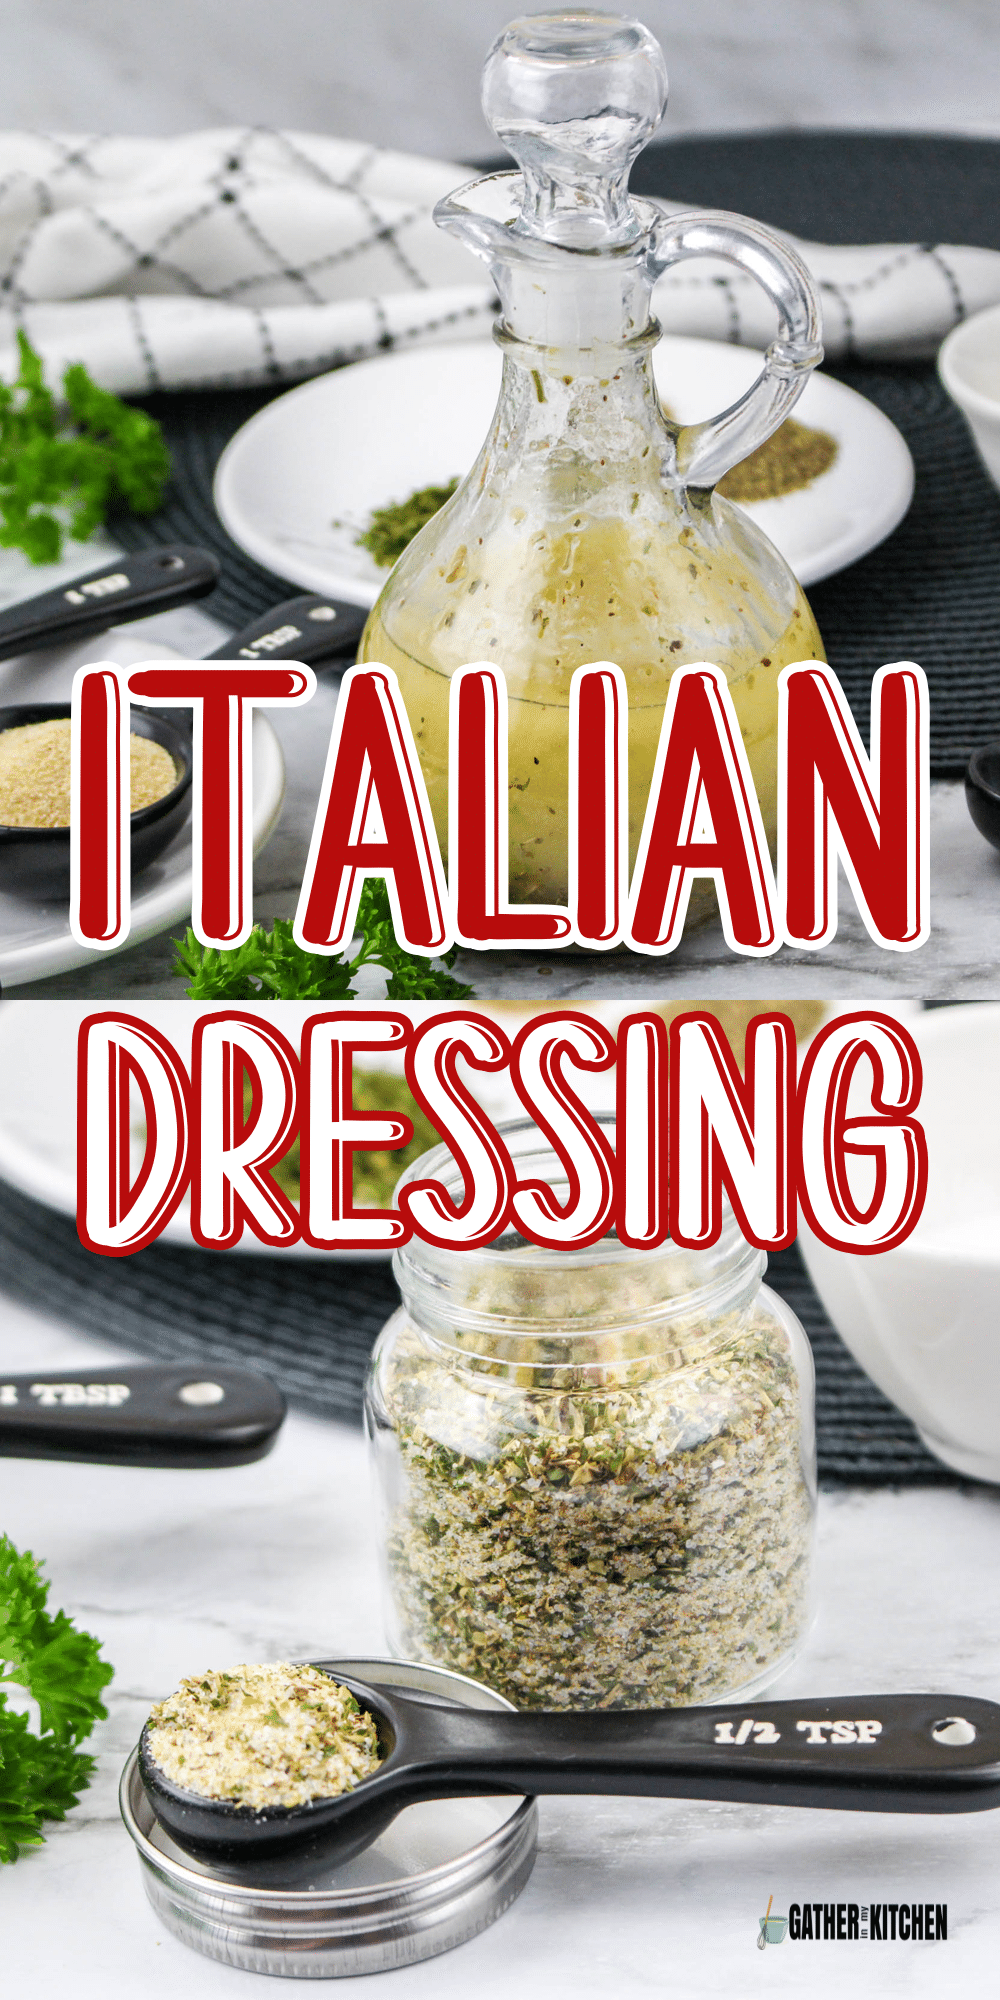 Pin image: top has image of made up Italian dressing in a bottle, bottom has the dry mix for the dressing on a spoon.